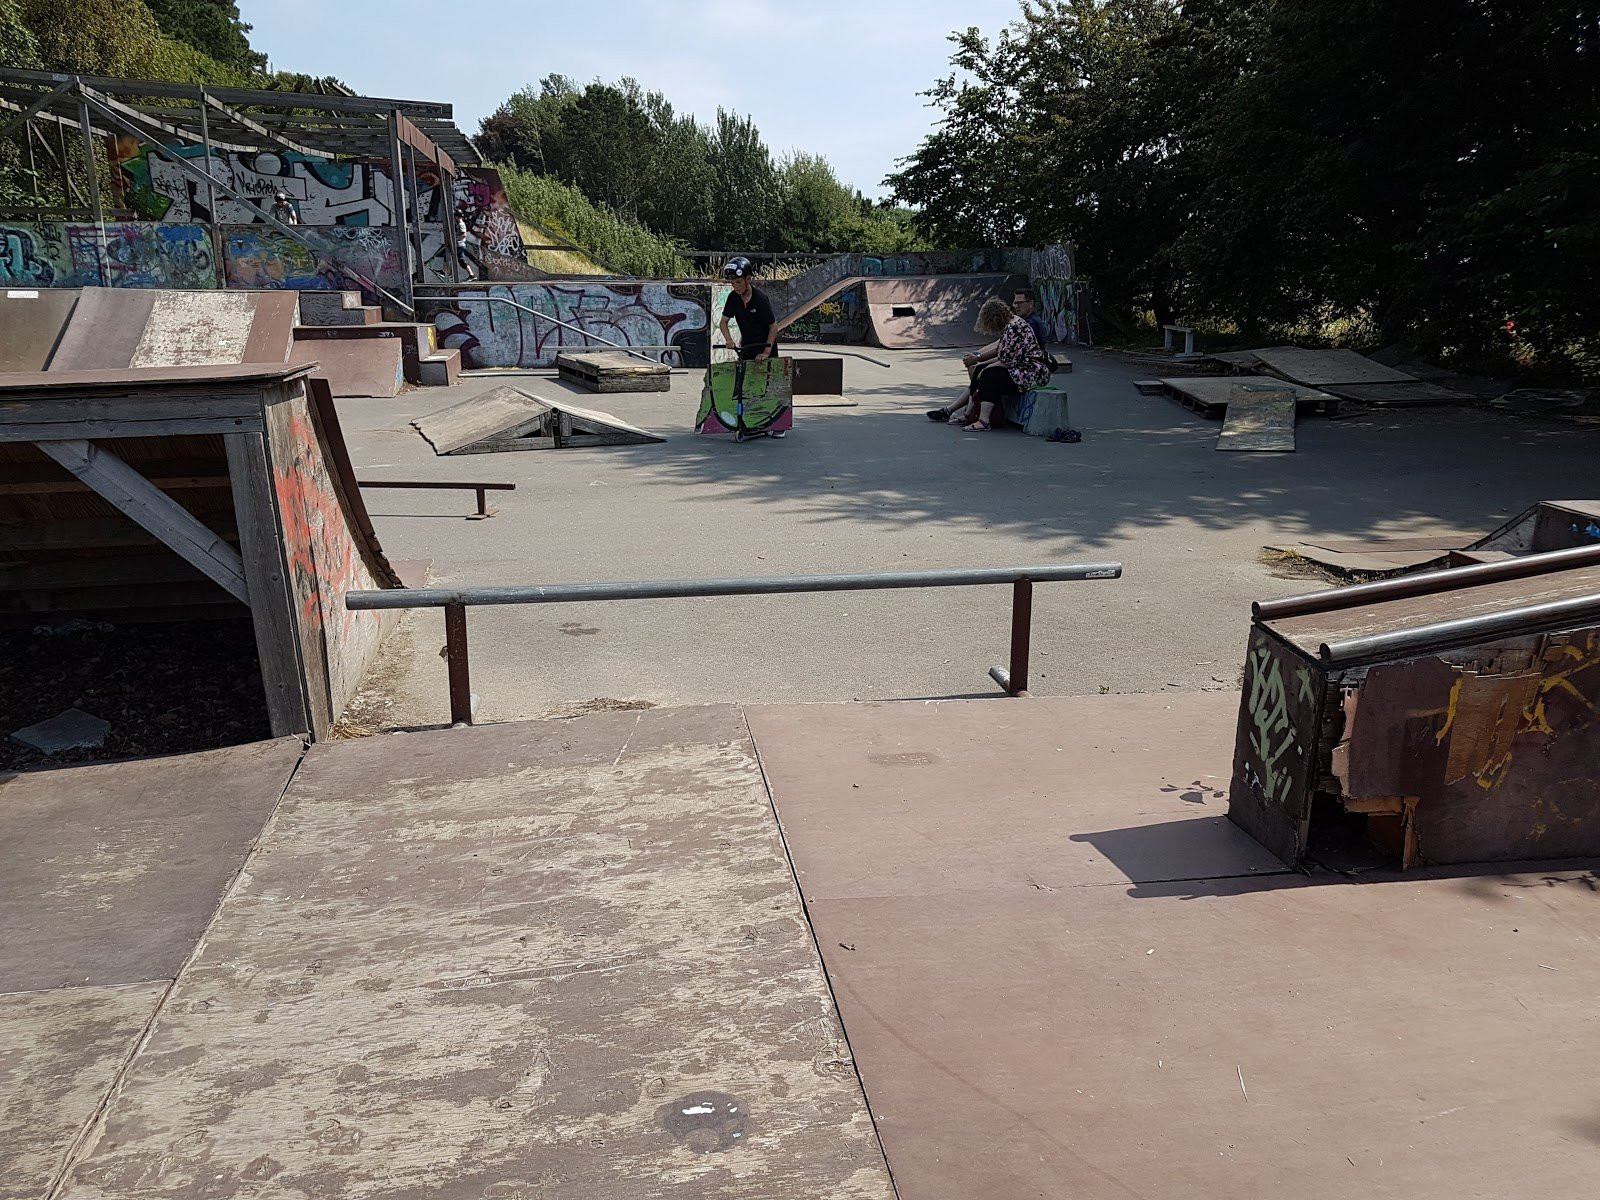 Rønne Skatepark is a good example of how private owners can build a skatepark which local people can use. The park is square and has everything a skater needs from a local skatepark.The park has quarter pipes, a mini vert, rails and grind boxes. The mini vert is a nice addition to the park because it’s height is so low that both beginners and more experienced skaters can use it. Most of the park is built of wood which means that some of the obstacles are a little worn, however most of them are maintained well. The park is perfect for local skaters and definitely worth a visit if you are travel to Bornholm.&nbsp;